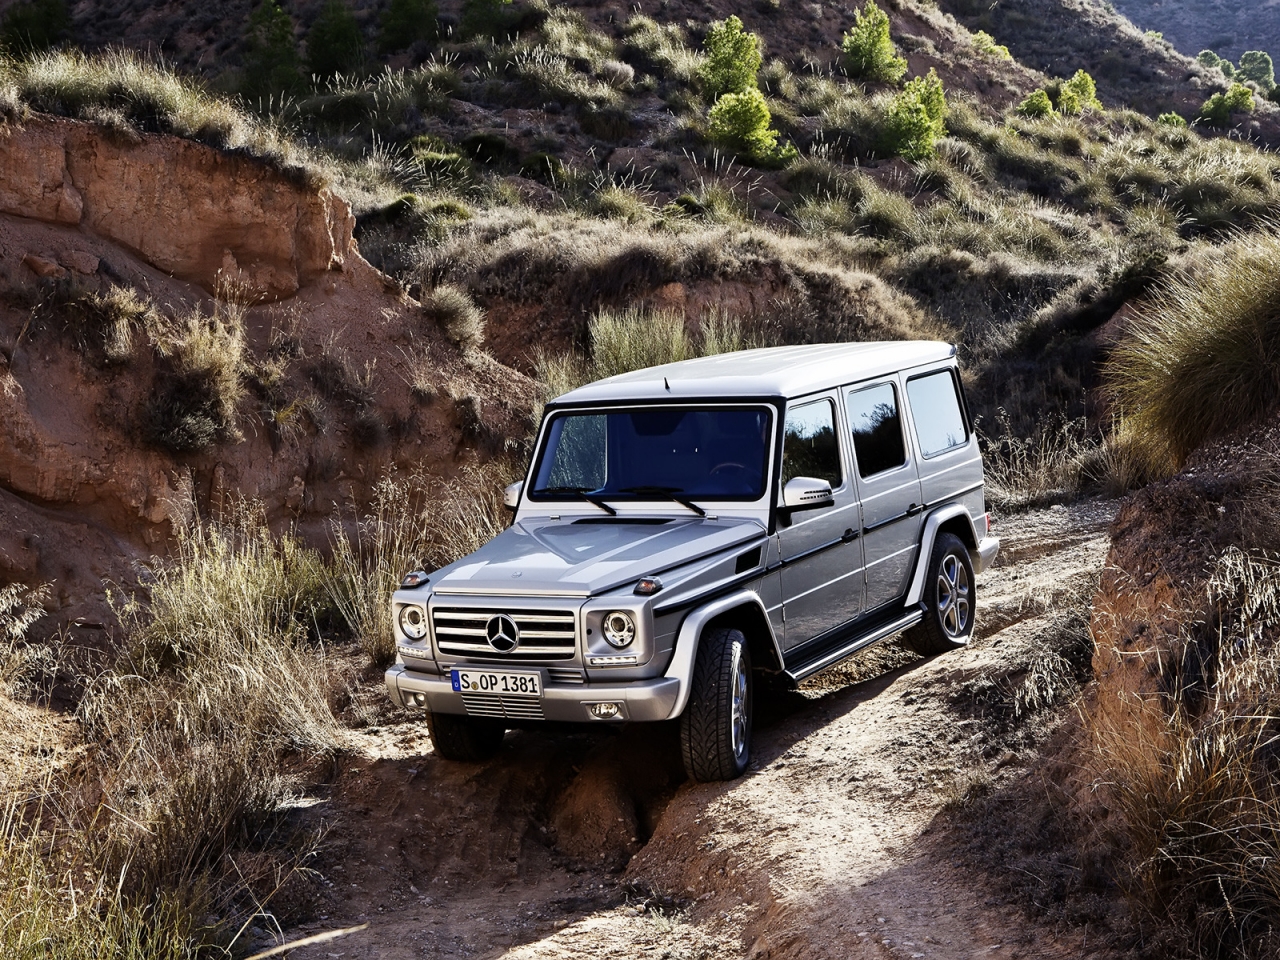 2013 Mercedes Benz G Class Off Road for 1280 x 960 resolution